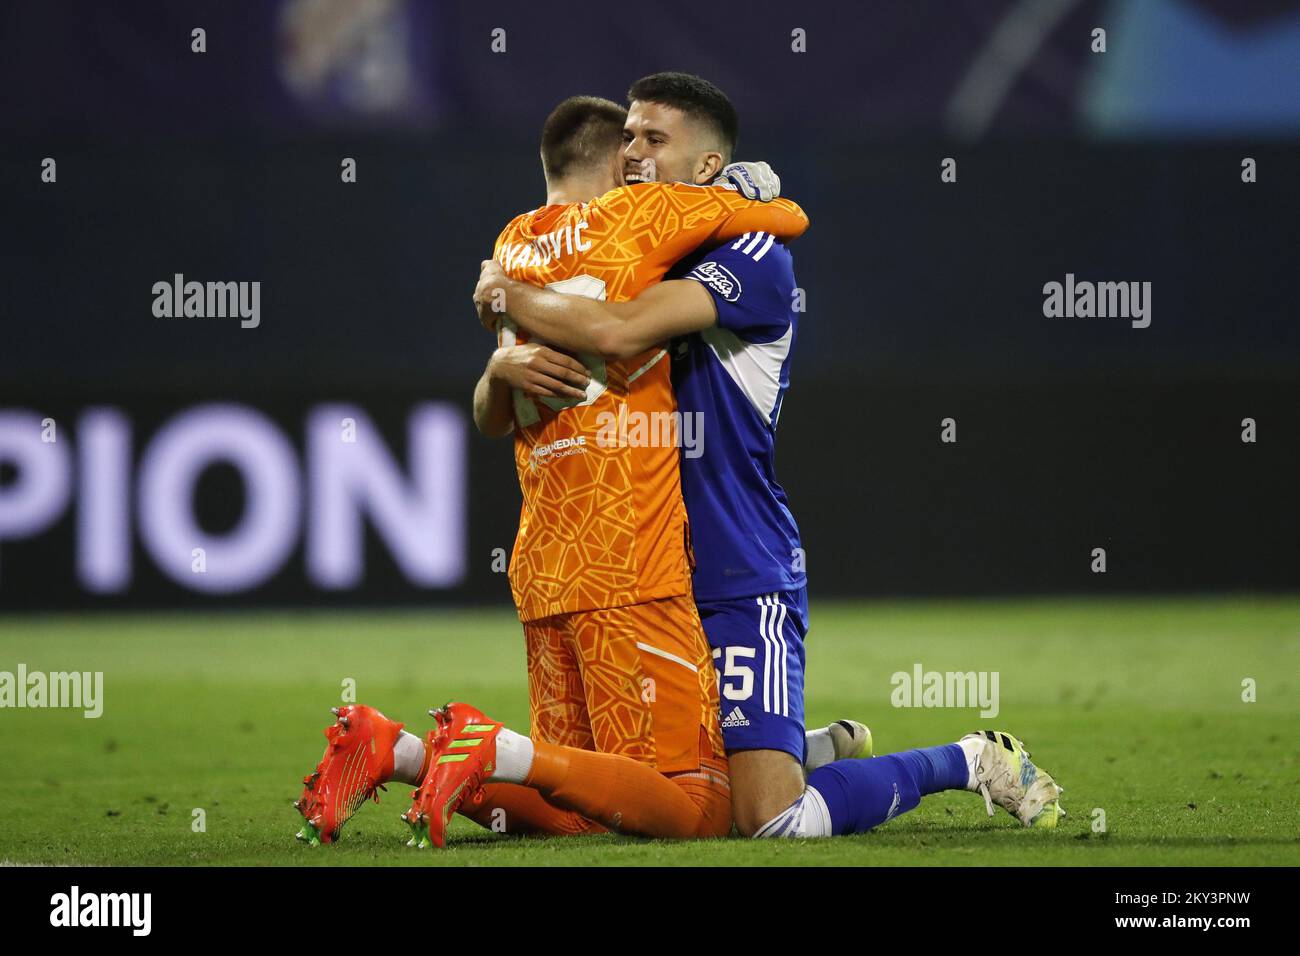 Zagreb, Croatia. 15th July, 2023. Luka Ivanusec of Dinamo Zagreb leaves the  pitch with an injury during the Supersport Supercup match between GNK Dinamo  Zagreb and HNK Hajduk Split at Maksimir stadium